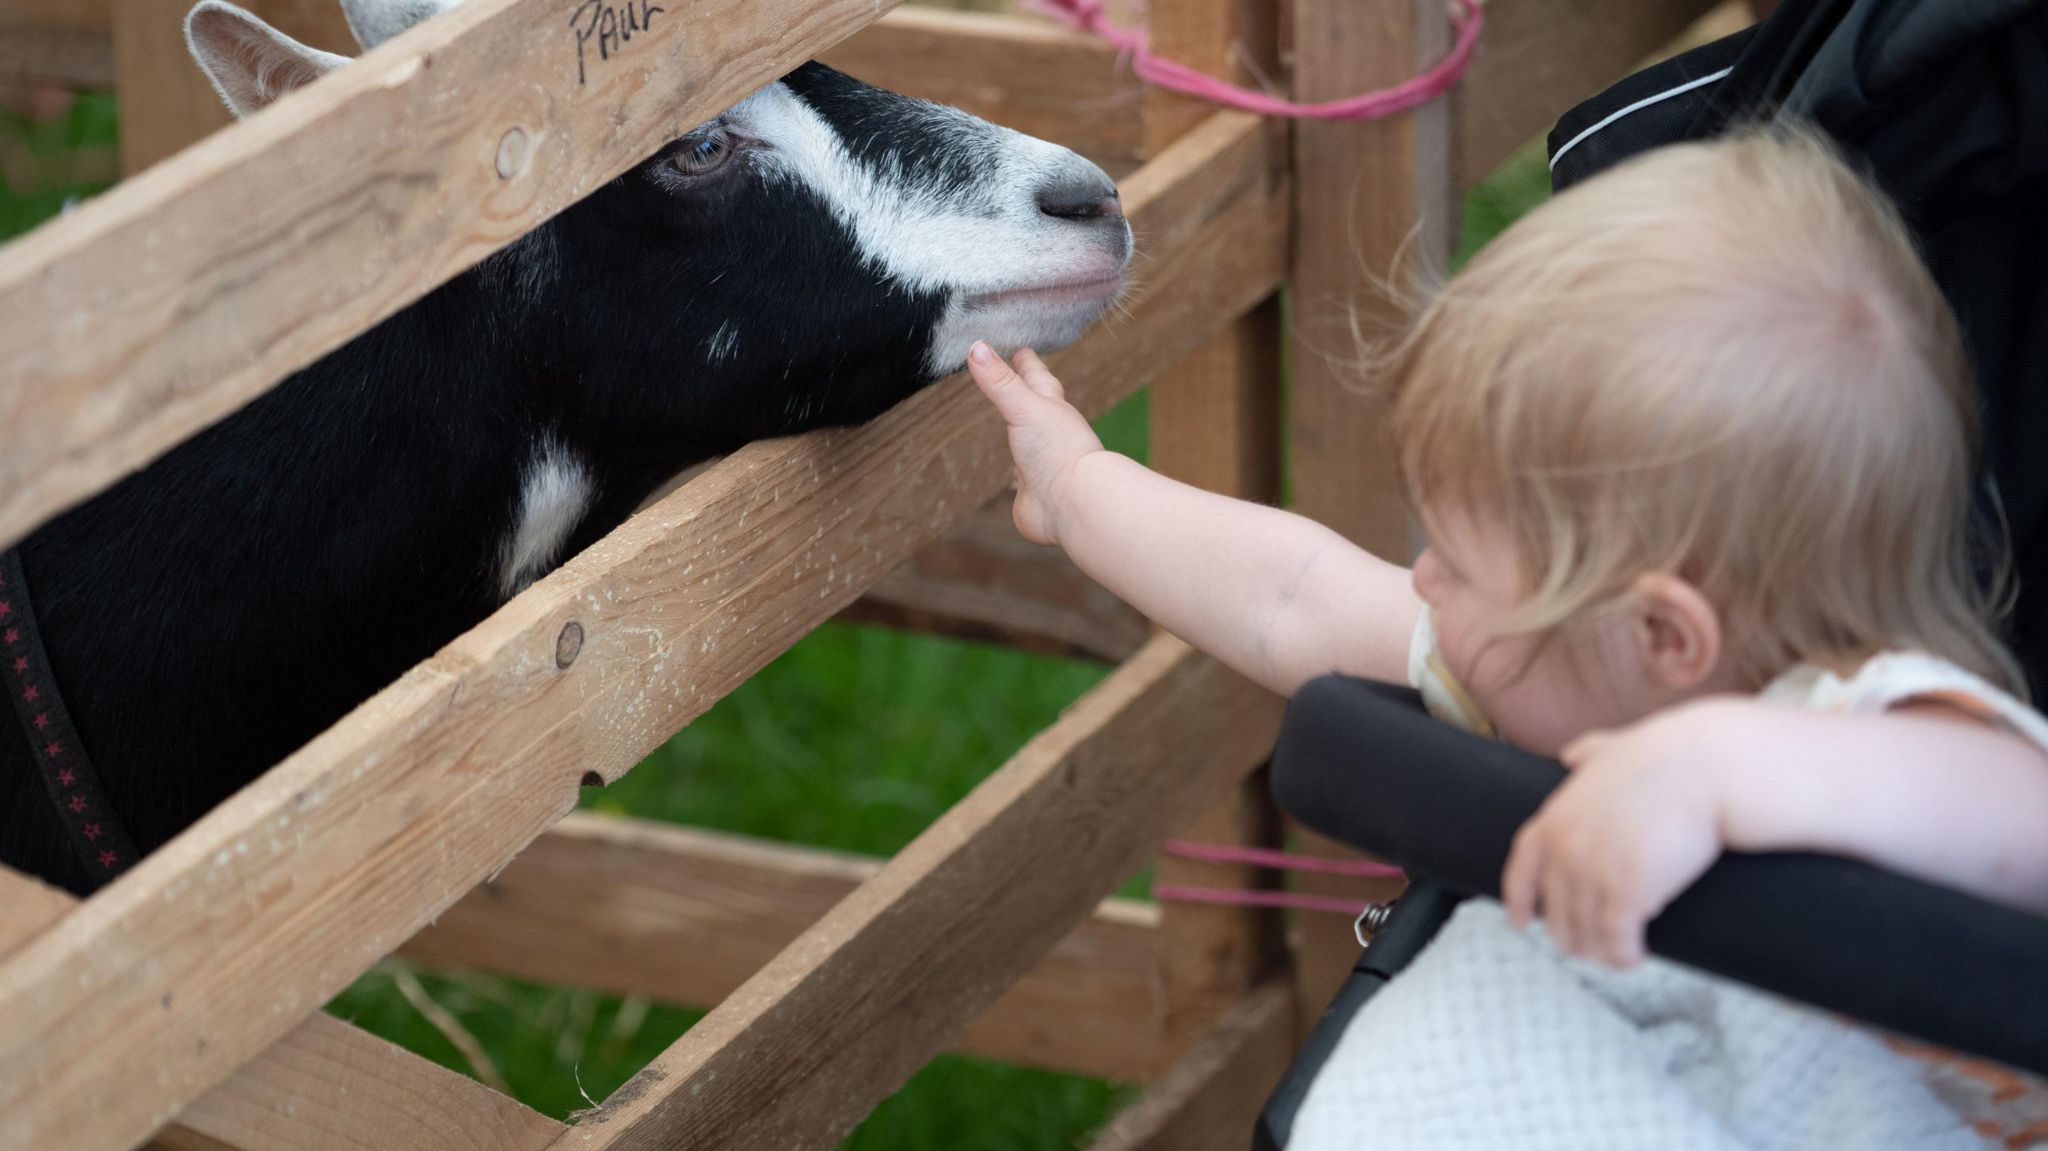 A little girl reaches out to touch a goat 